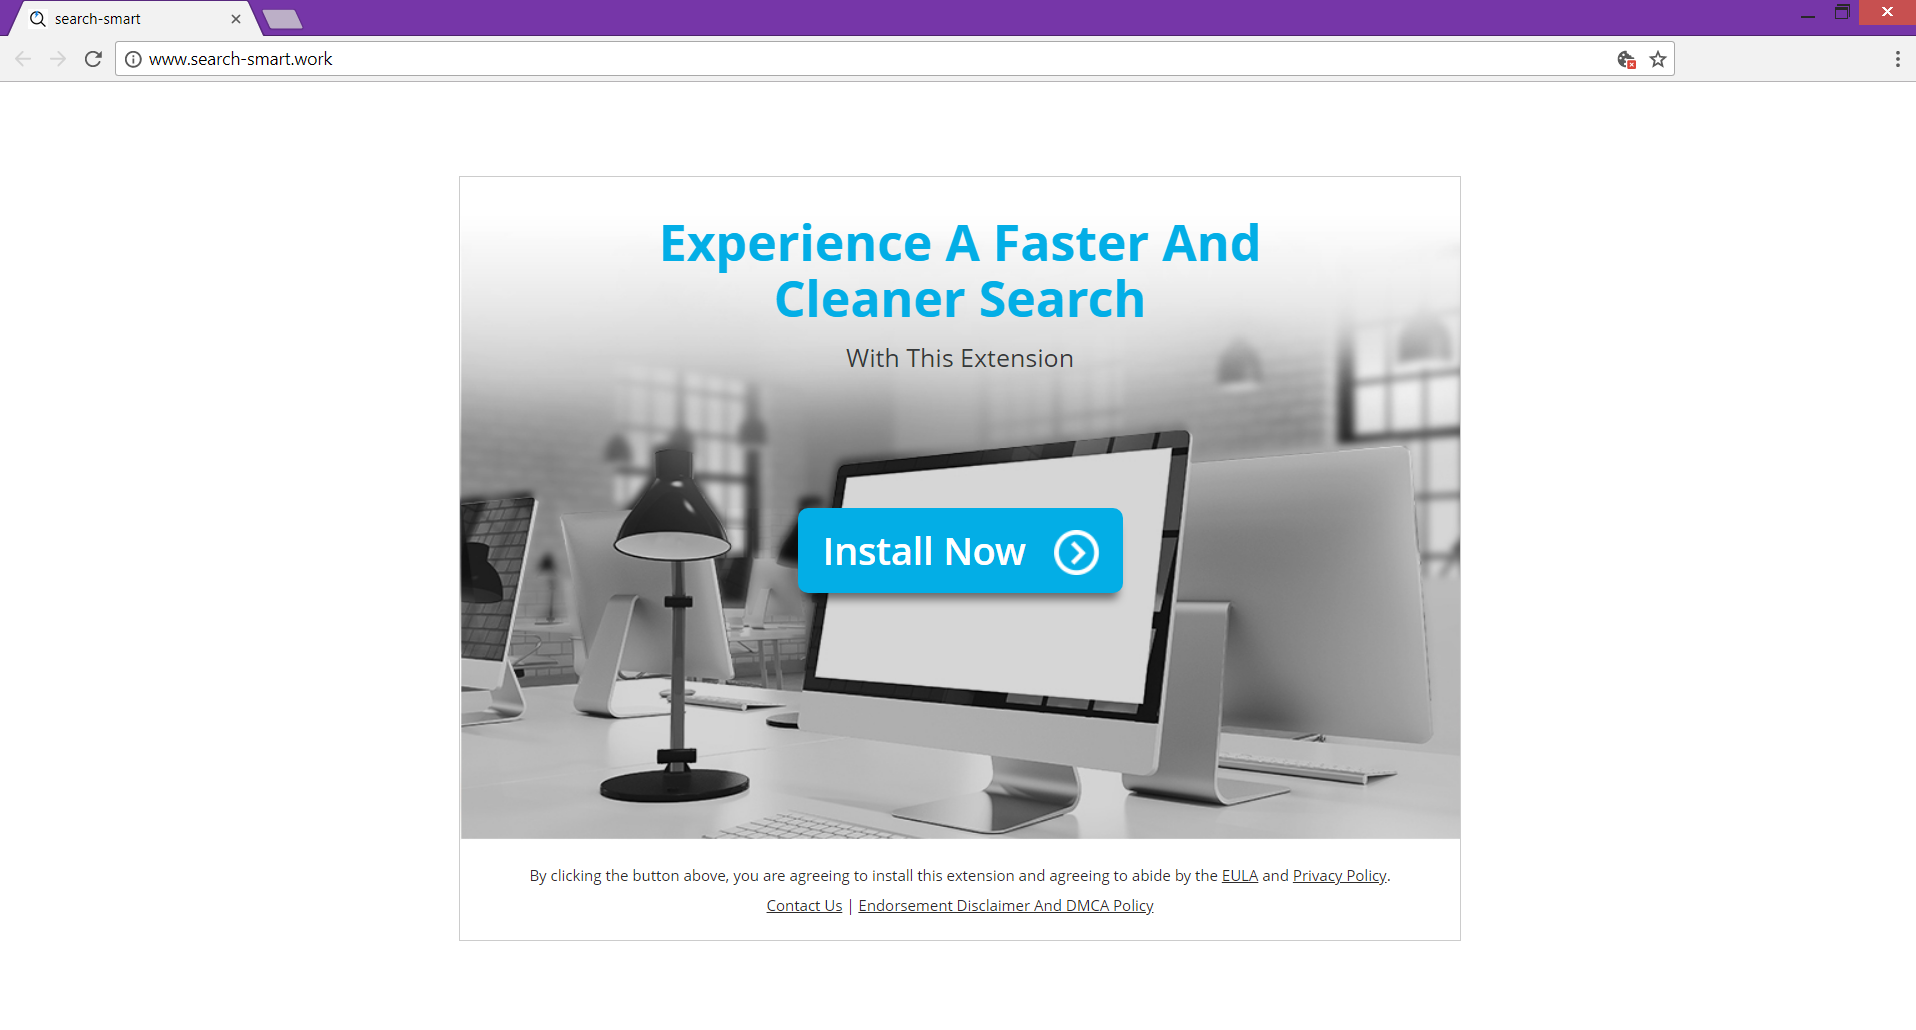 Search-smart.work redirect main page